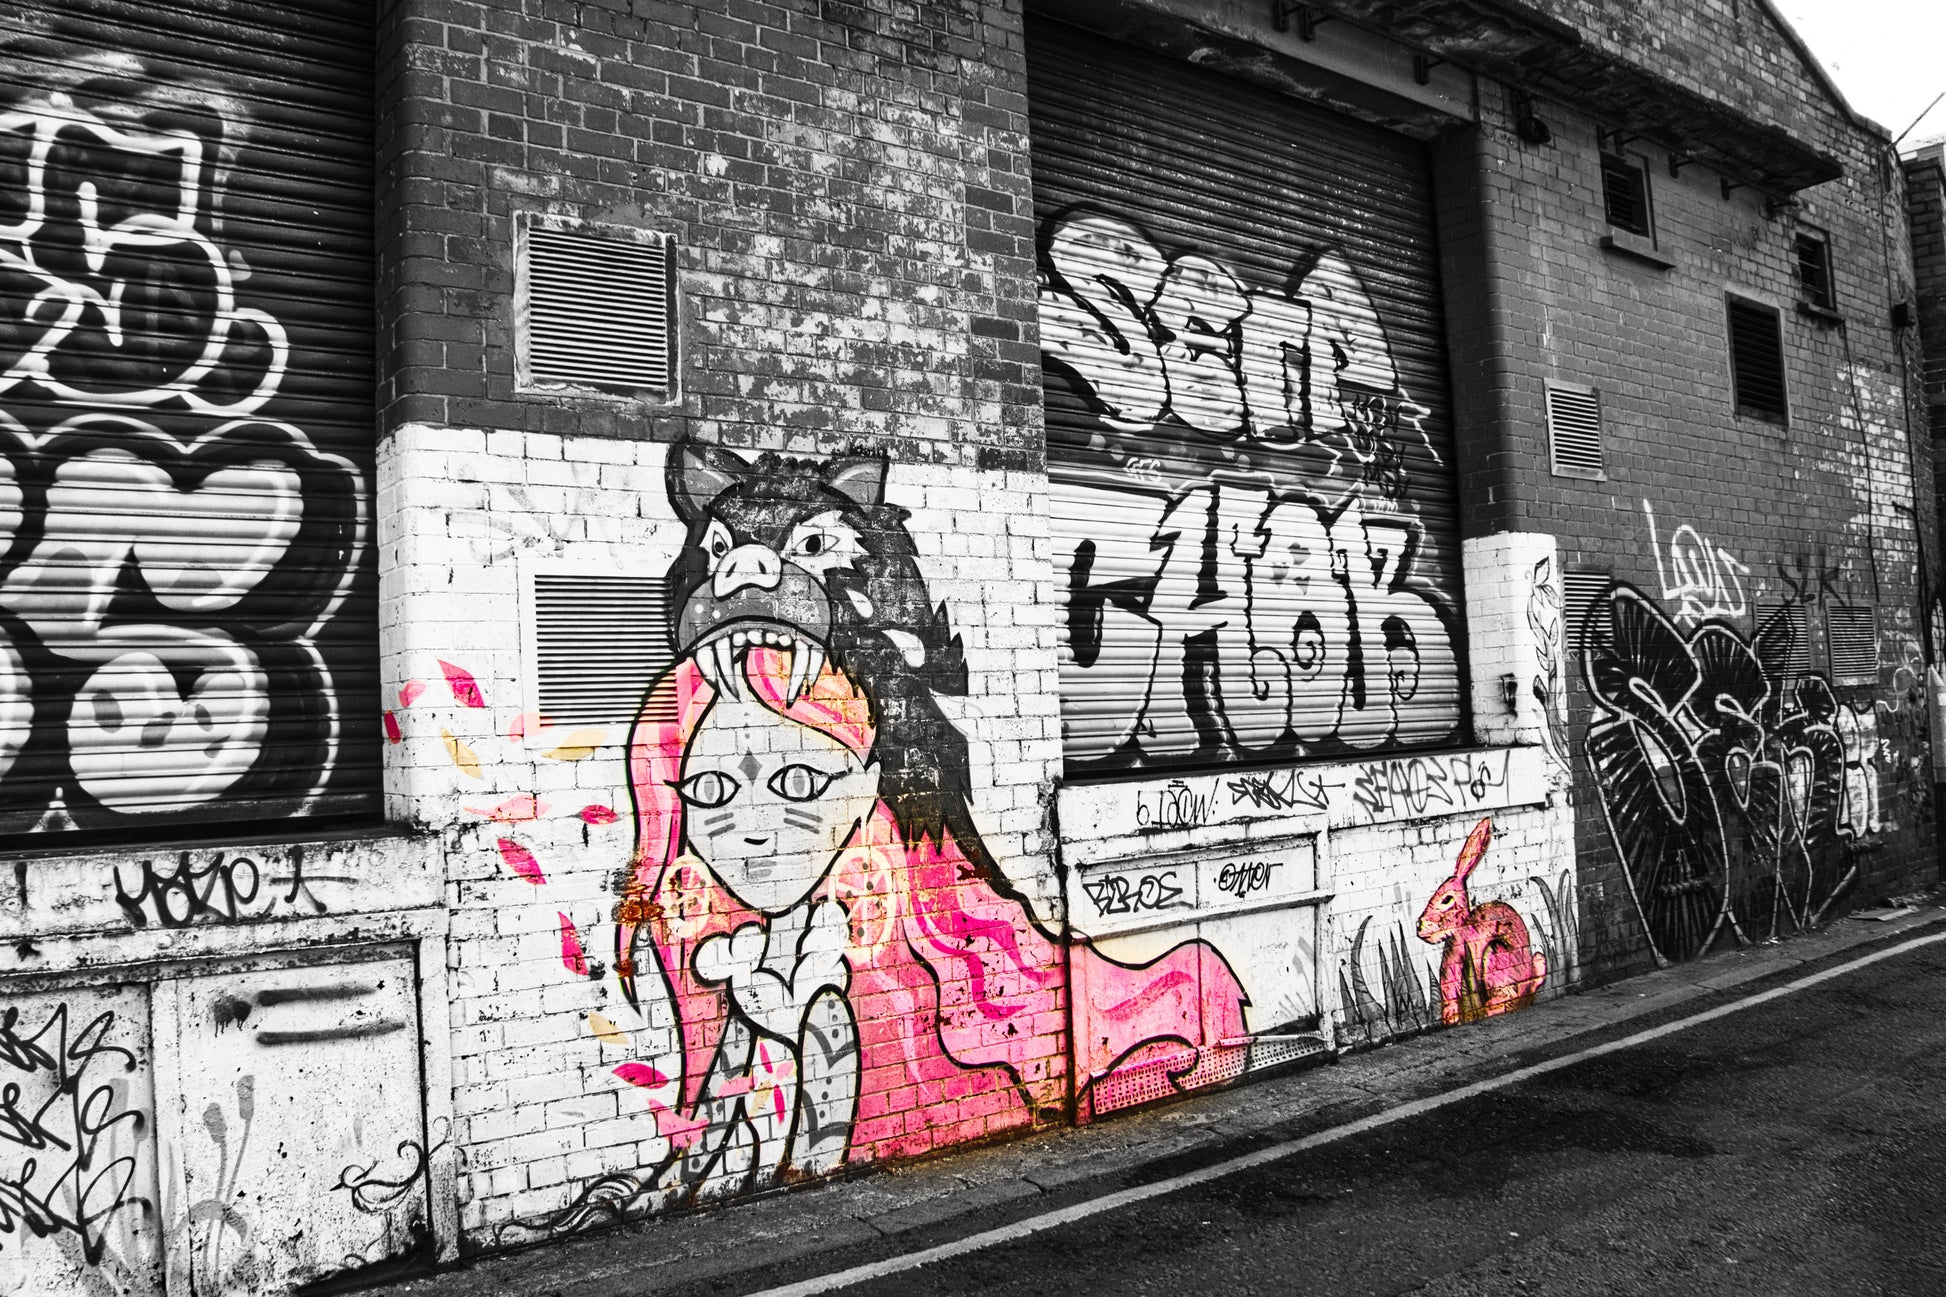 Liverpool Baltic Triangle Photo and Images -Liverpool Graffiti - Pink Lady - PTI07437 - Photo by Photographer Martin Fisher - Picture The Image